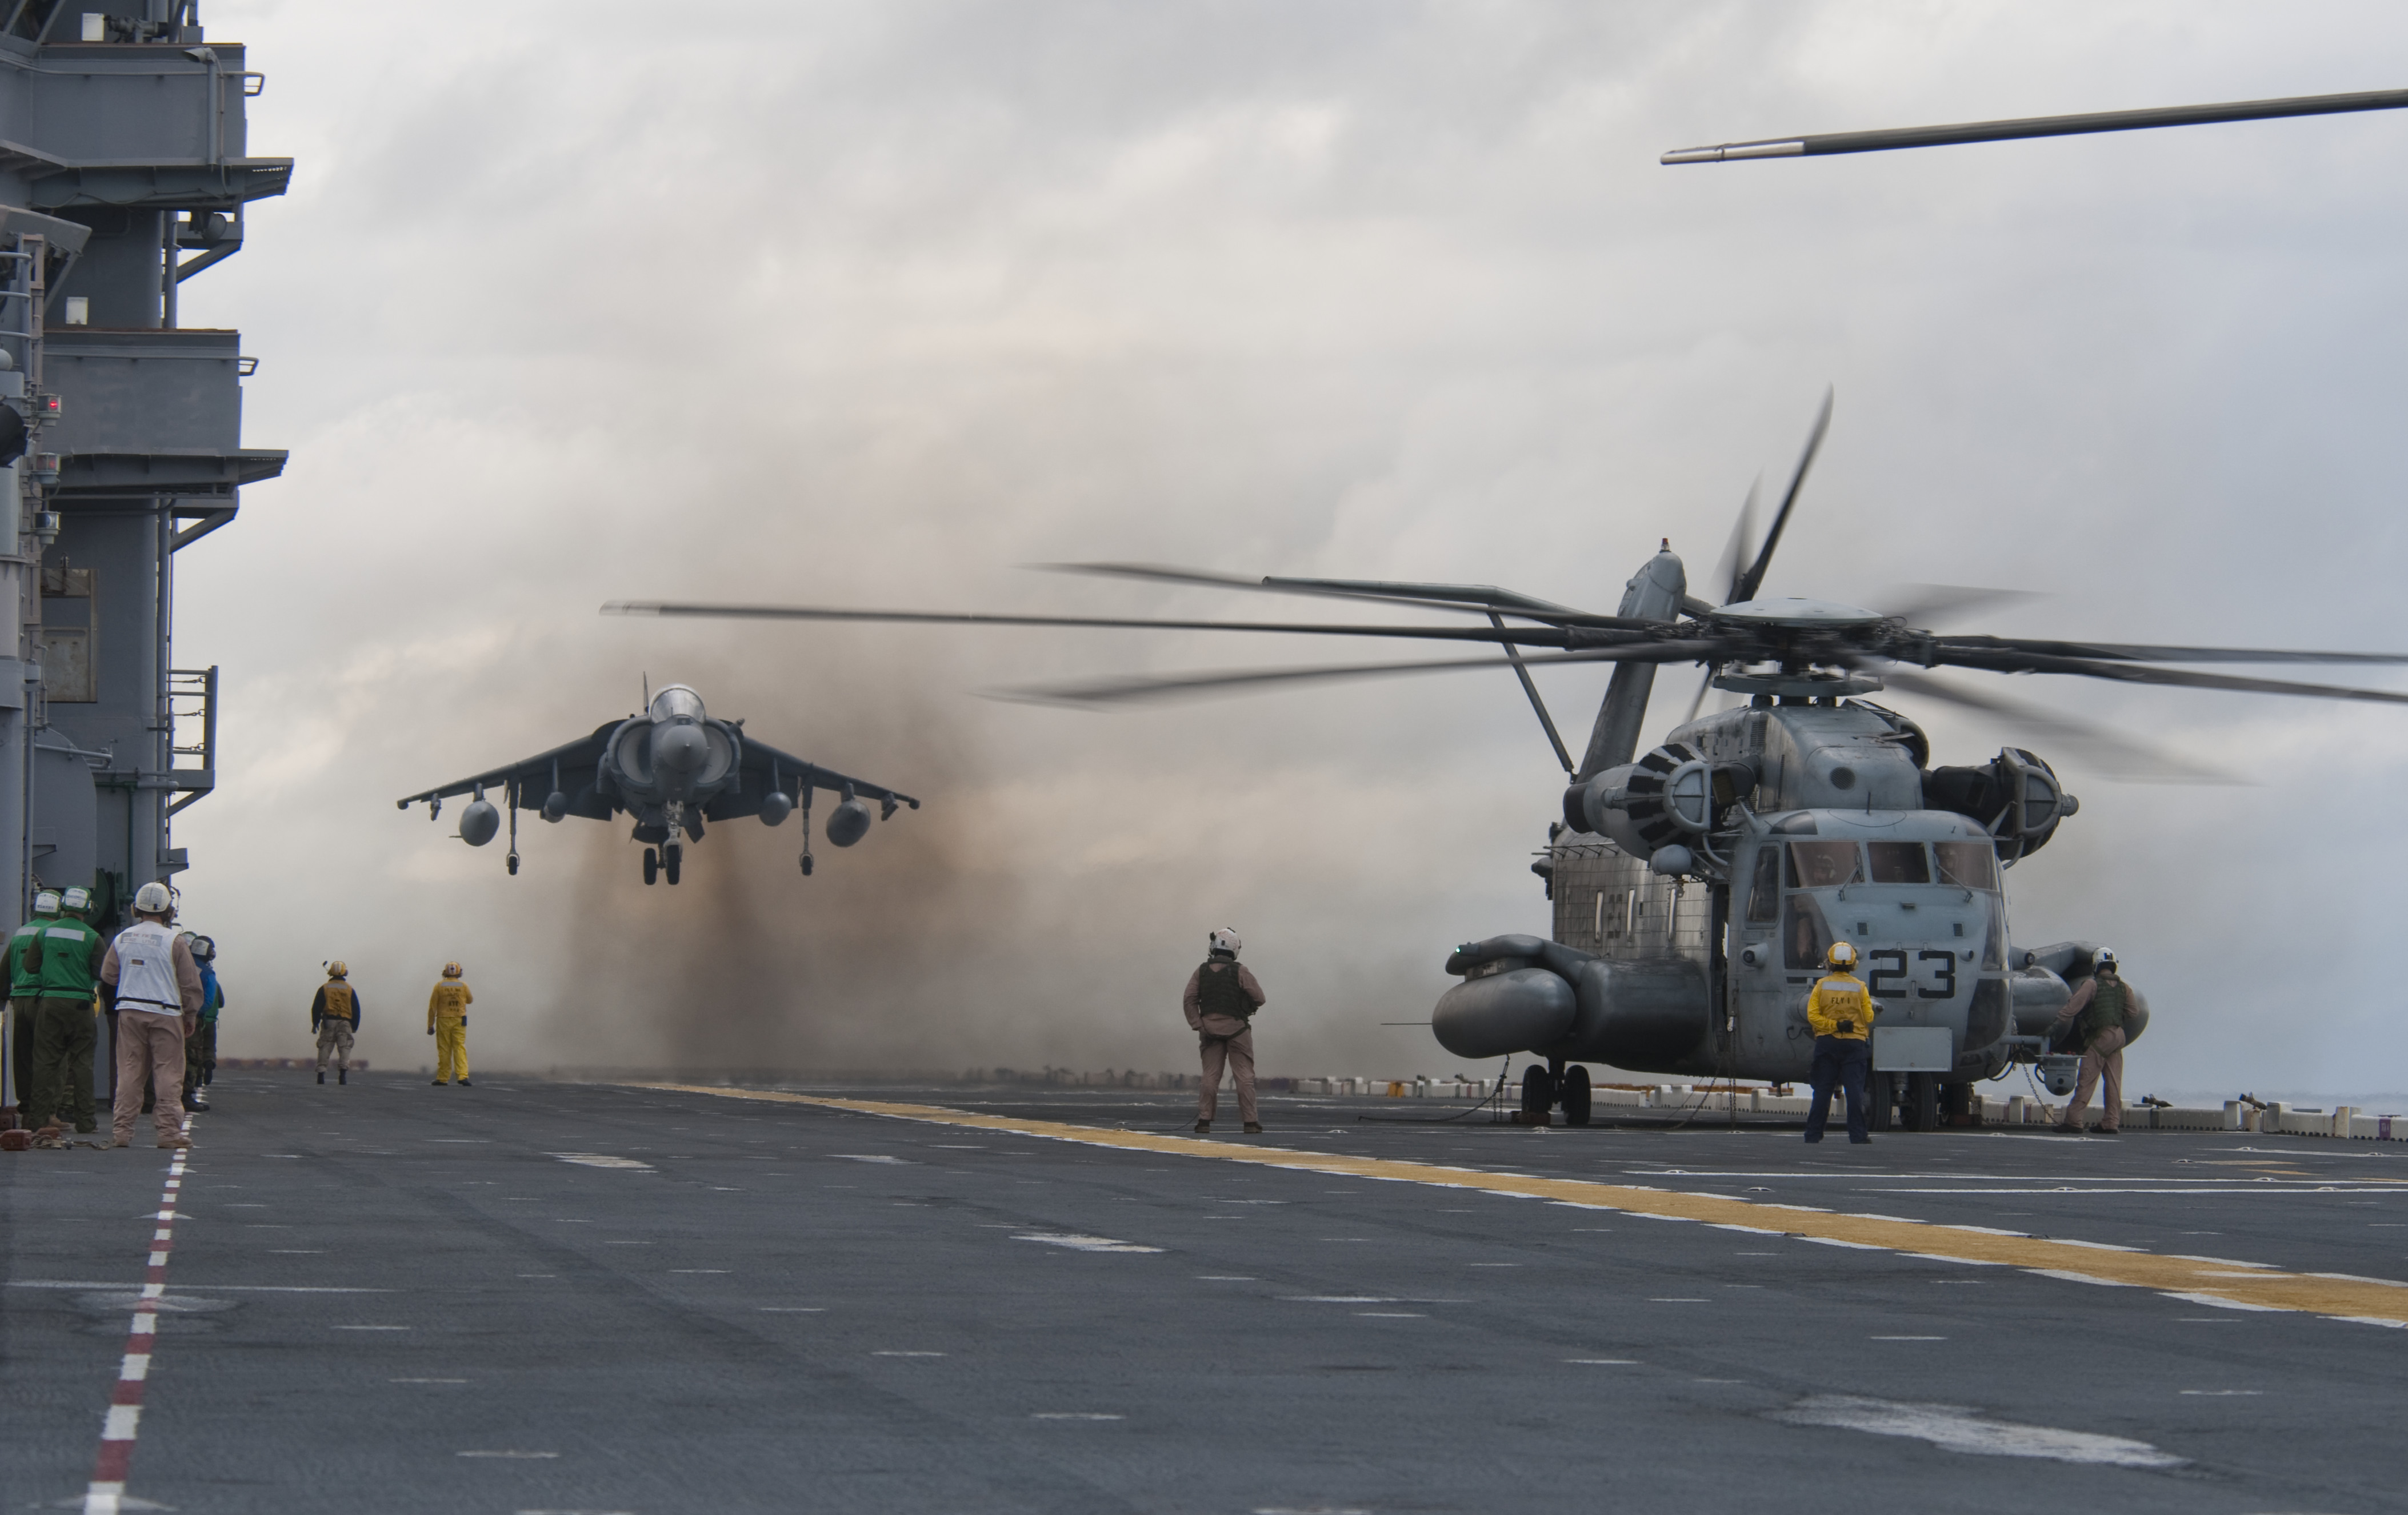 US_Navy_091026-N-5319A-025_An_AV-8_Harrier_from_Marine_Attack_Squadron_(VMA)_223_lands_next_to_an_MH-53E_Sea_Dragon_helicopter_aboard_the_amphibious_assault_ship_USS_Nassau_(LHA_4)_during_flight_operations.jpg